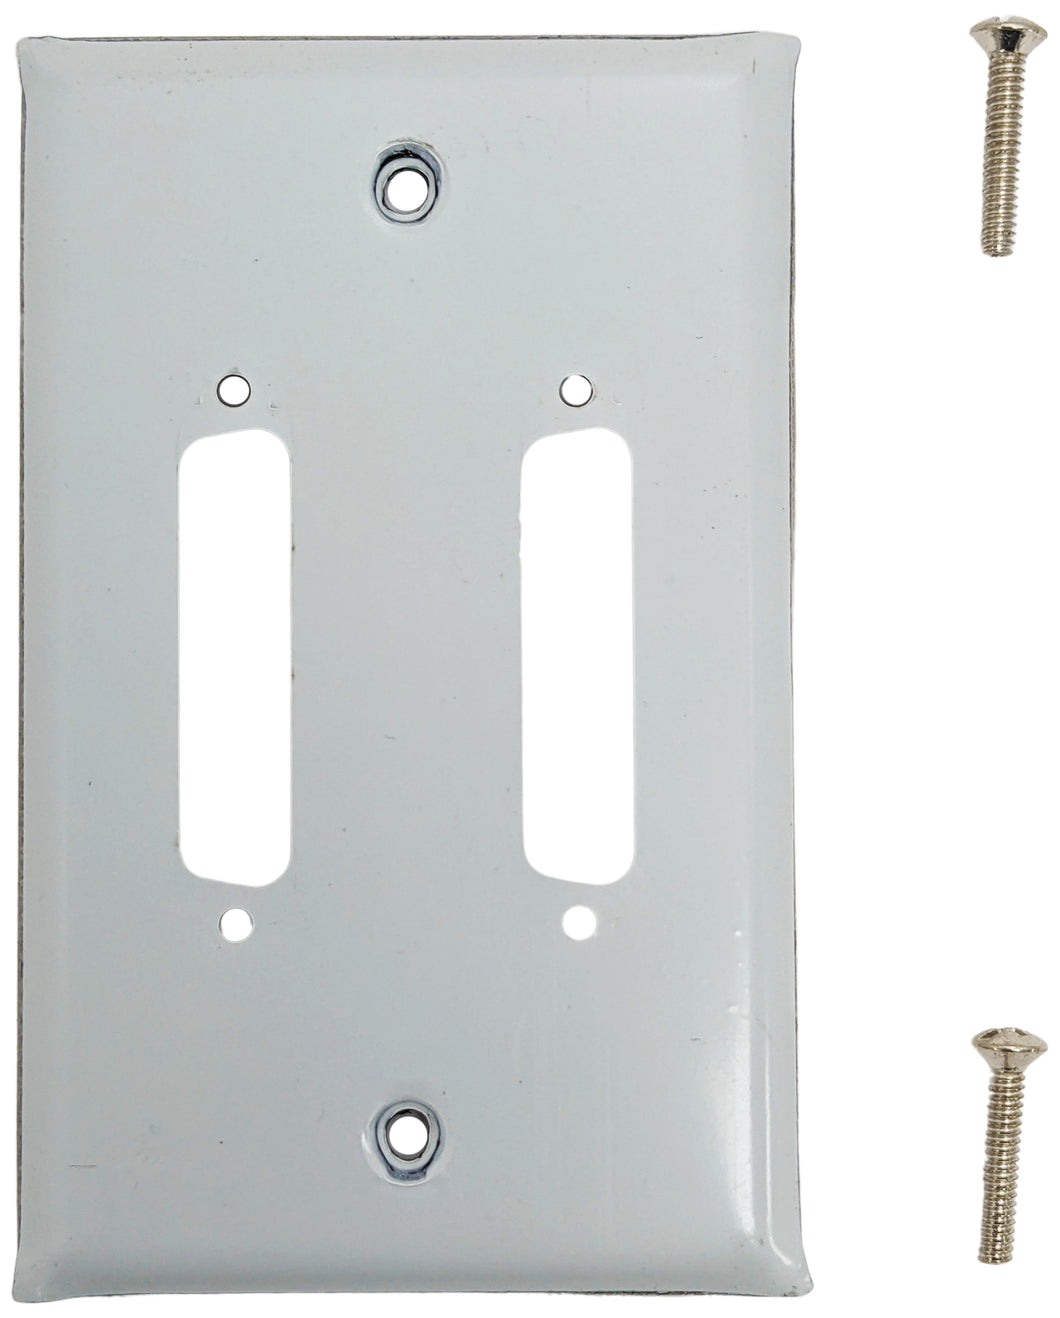 Stainless Steel Wall Plate with Dual DB25 Holes (2.73